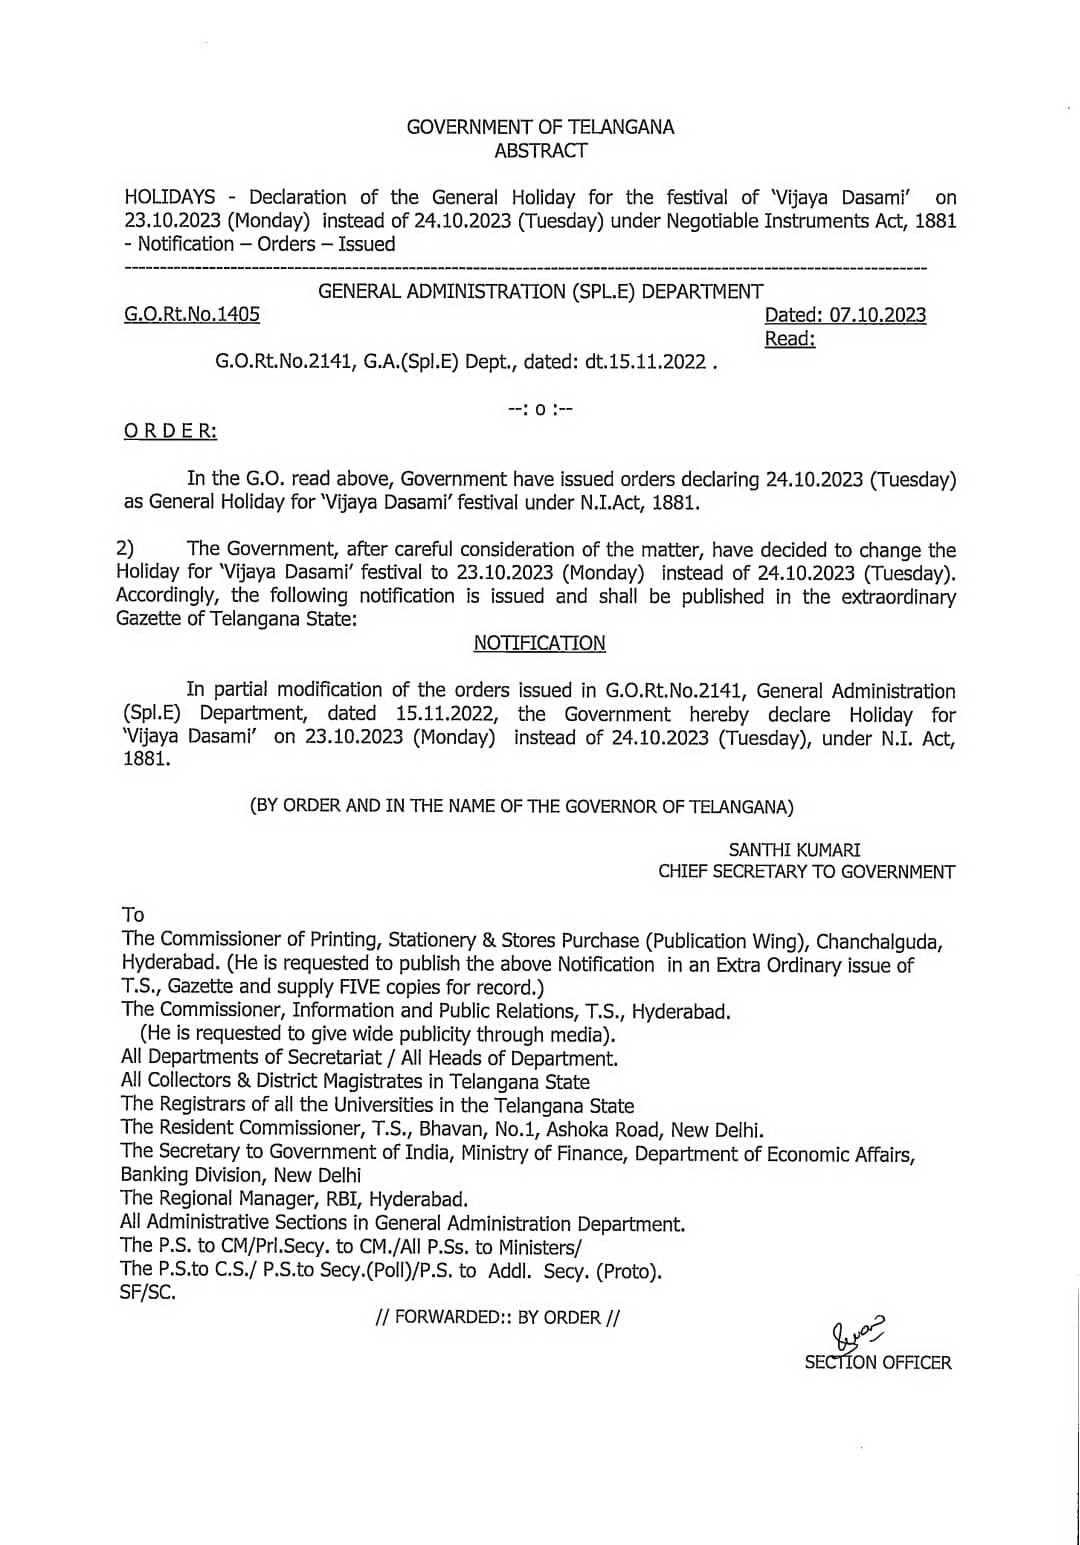 The-Government-of-Telangana-notification-announcing-public-holiday-on-23rd-October-2023-instead-of-24th-October-2023-Karma-Global